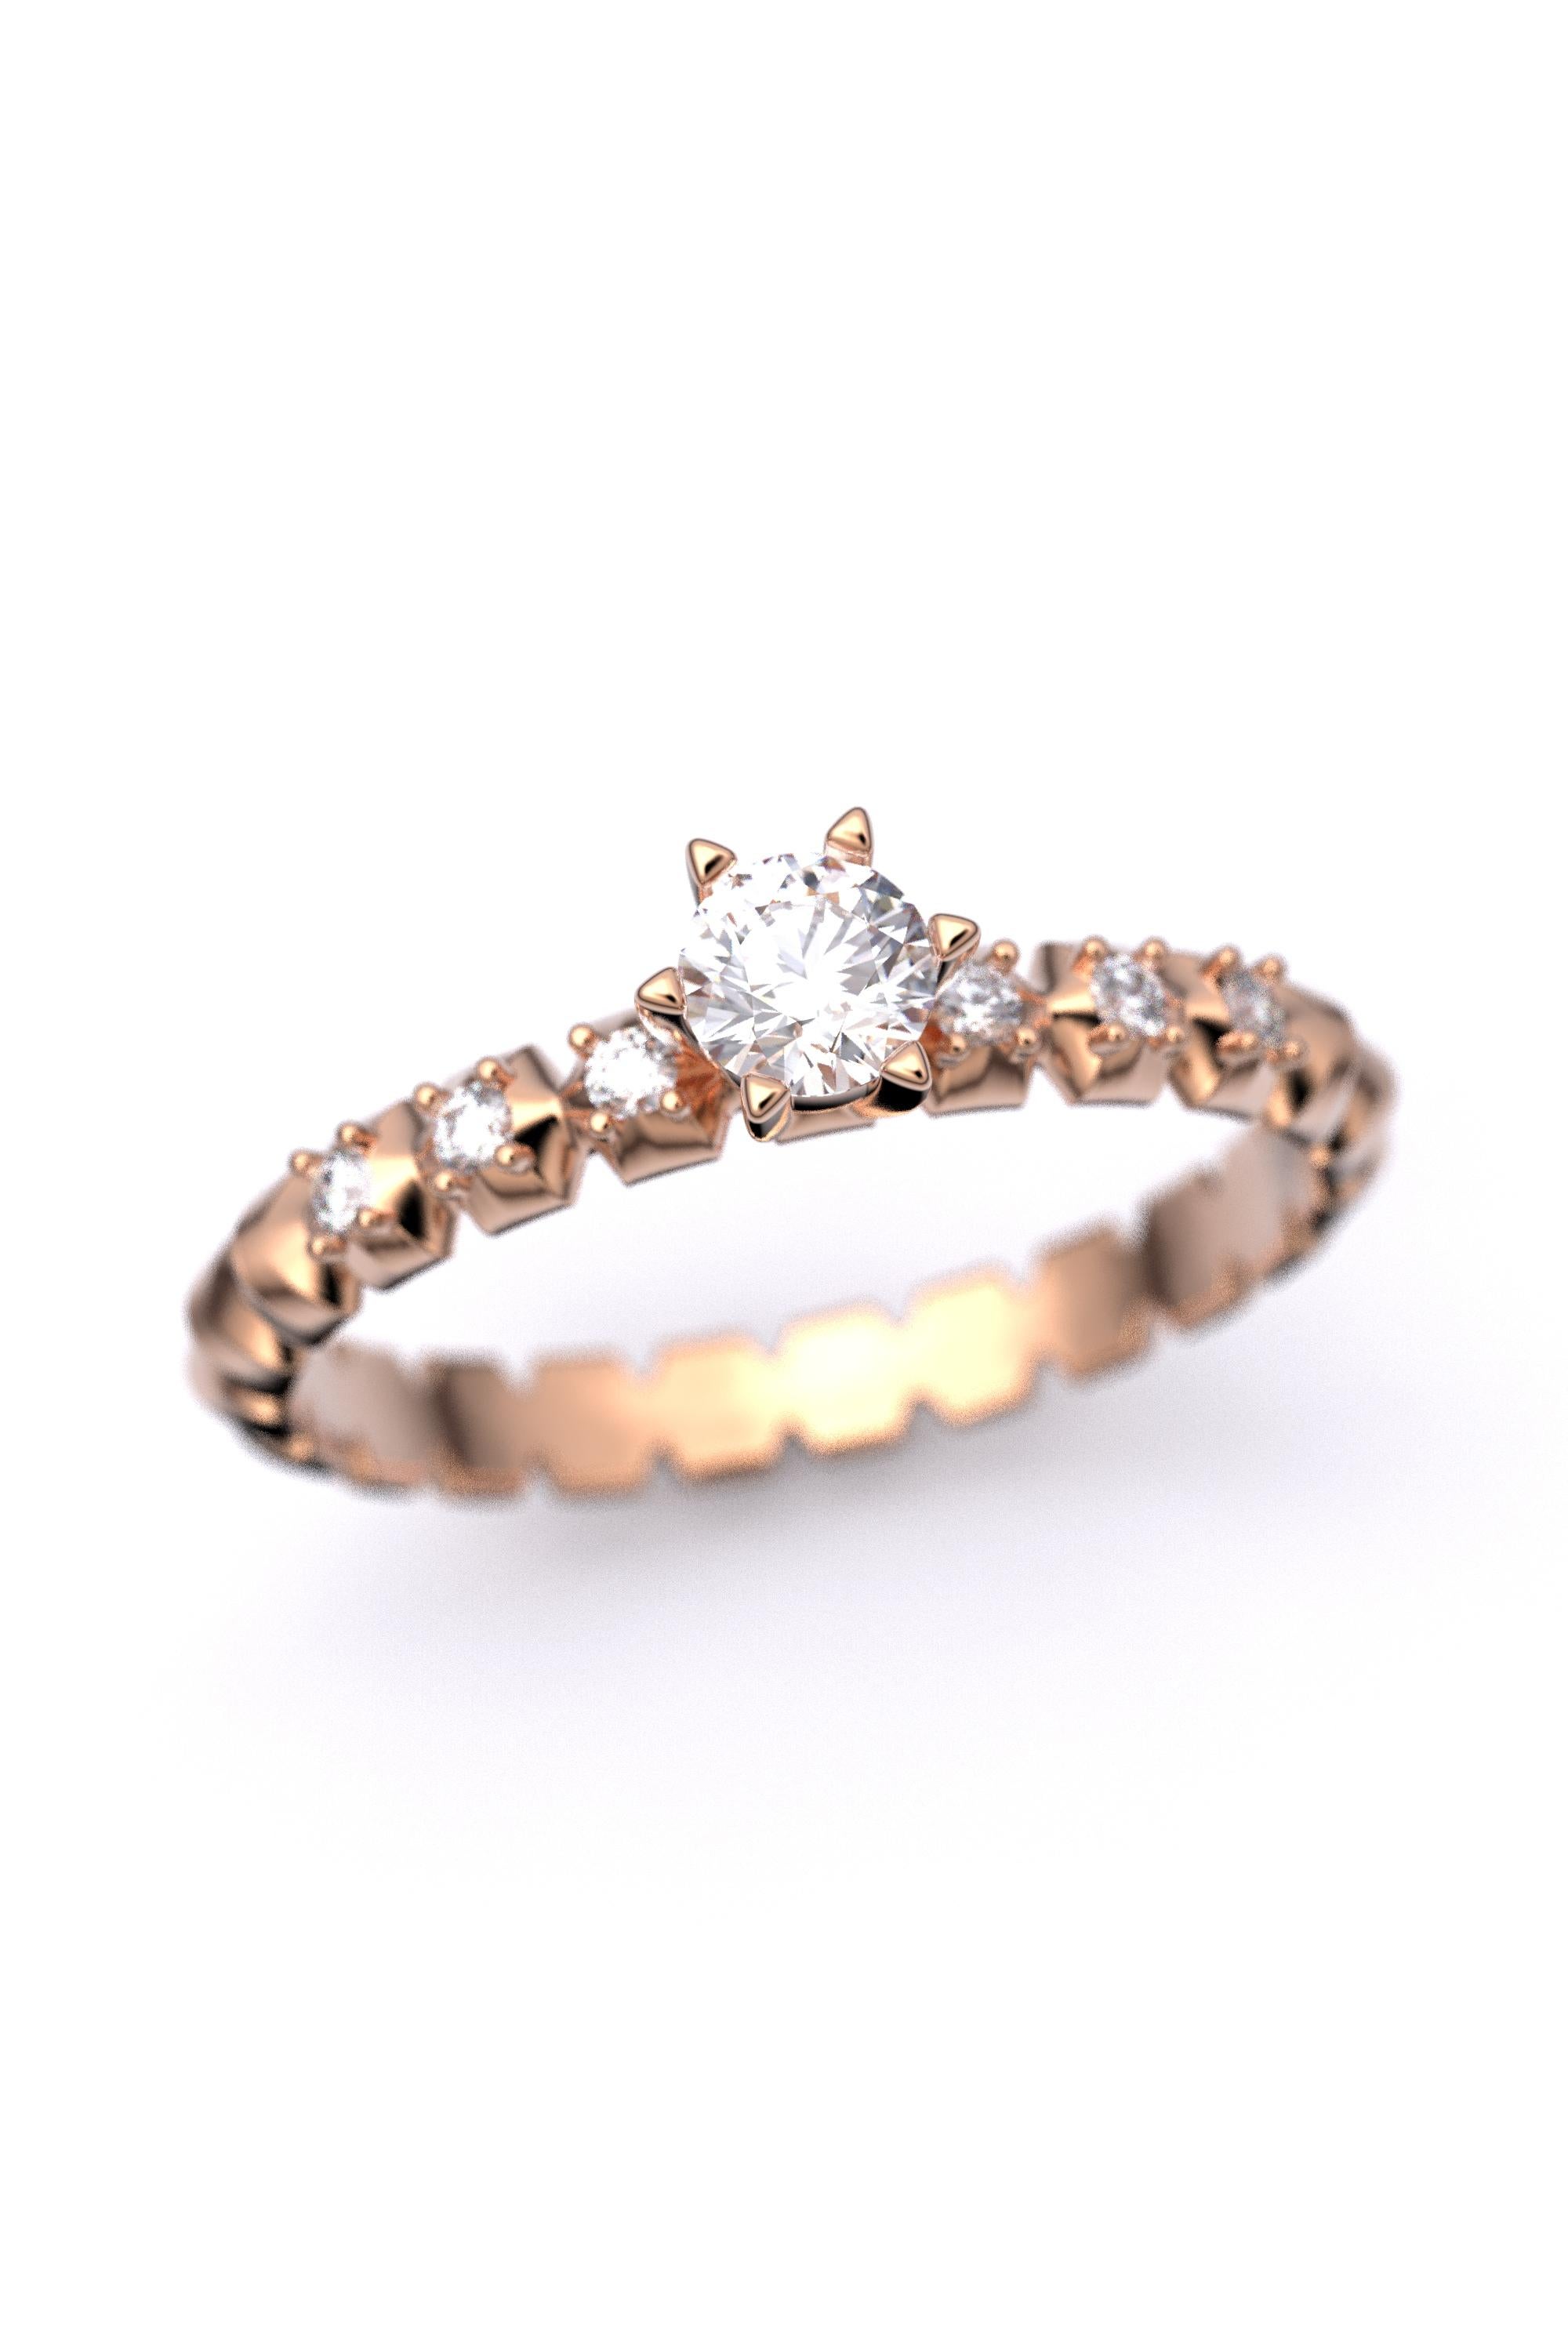 For Sale:  Italian-Made 0.32 Carat Diamond Engagement Ring in 18k Solid Gold 14